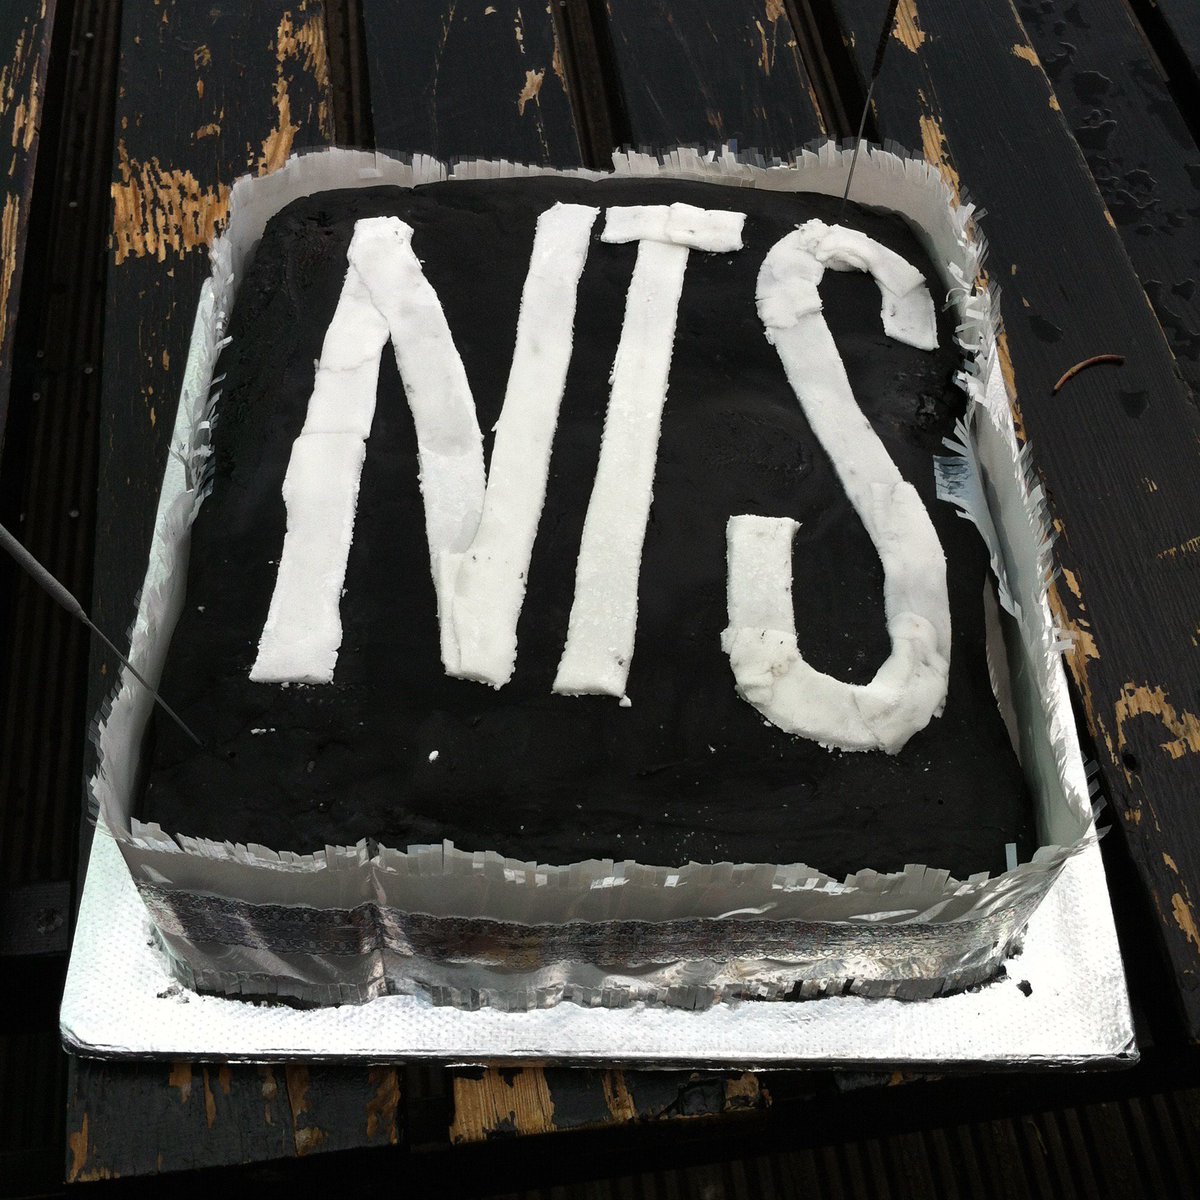 NTS turns 11 today 🎂 Thank you for all the support over the years - much love 🖤